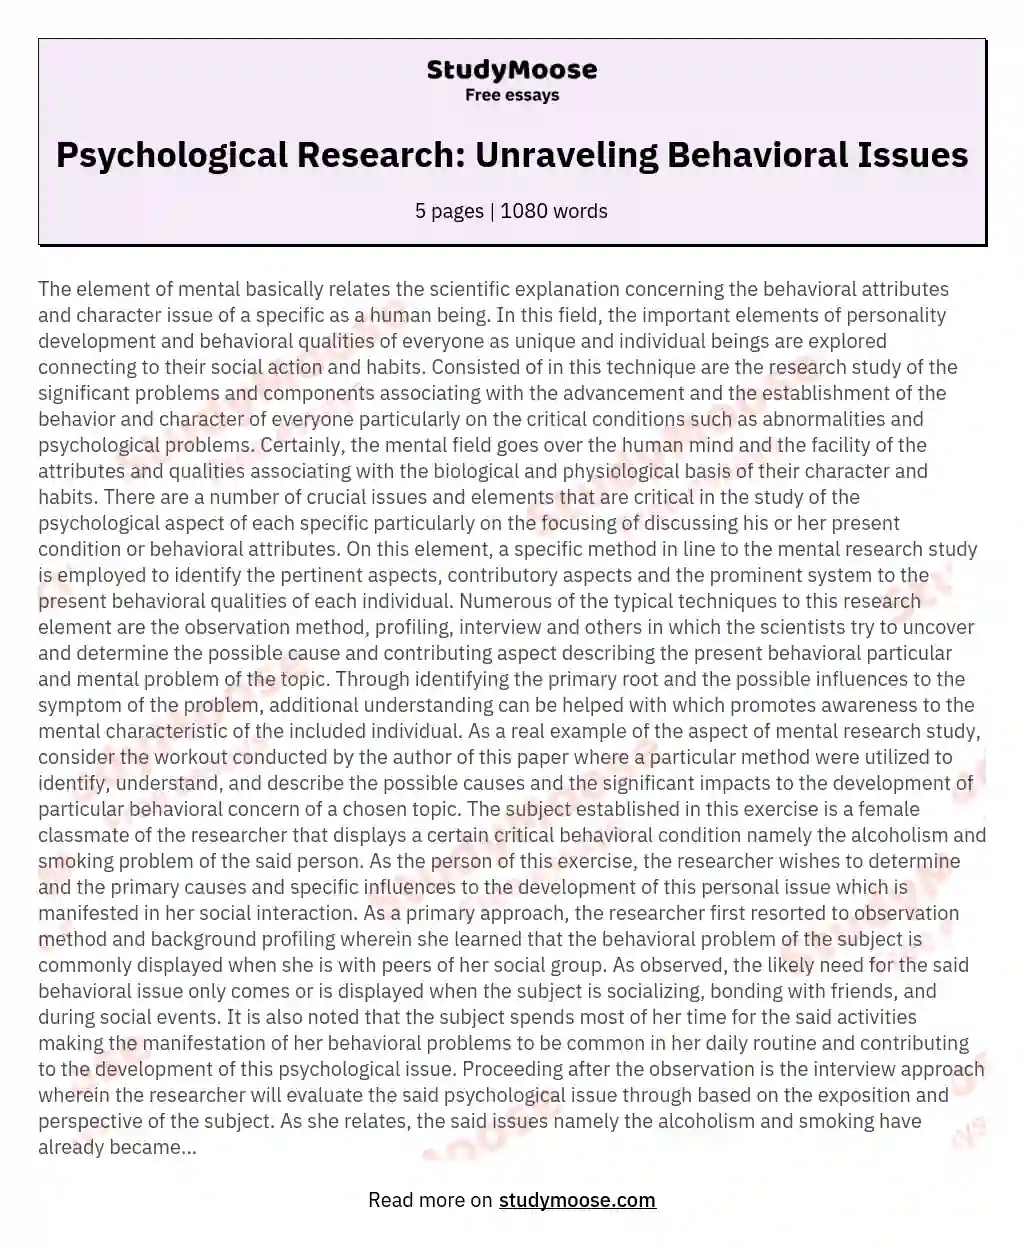 Psychological Research: Unraveling Behavioral Issues essay